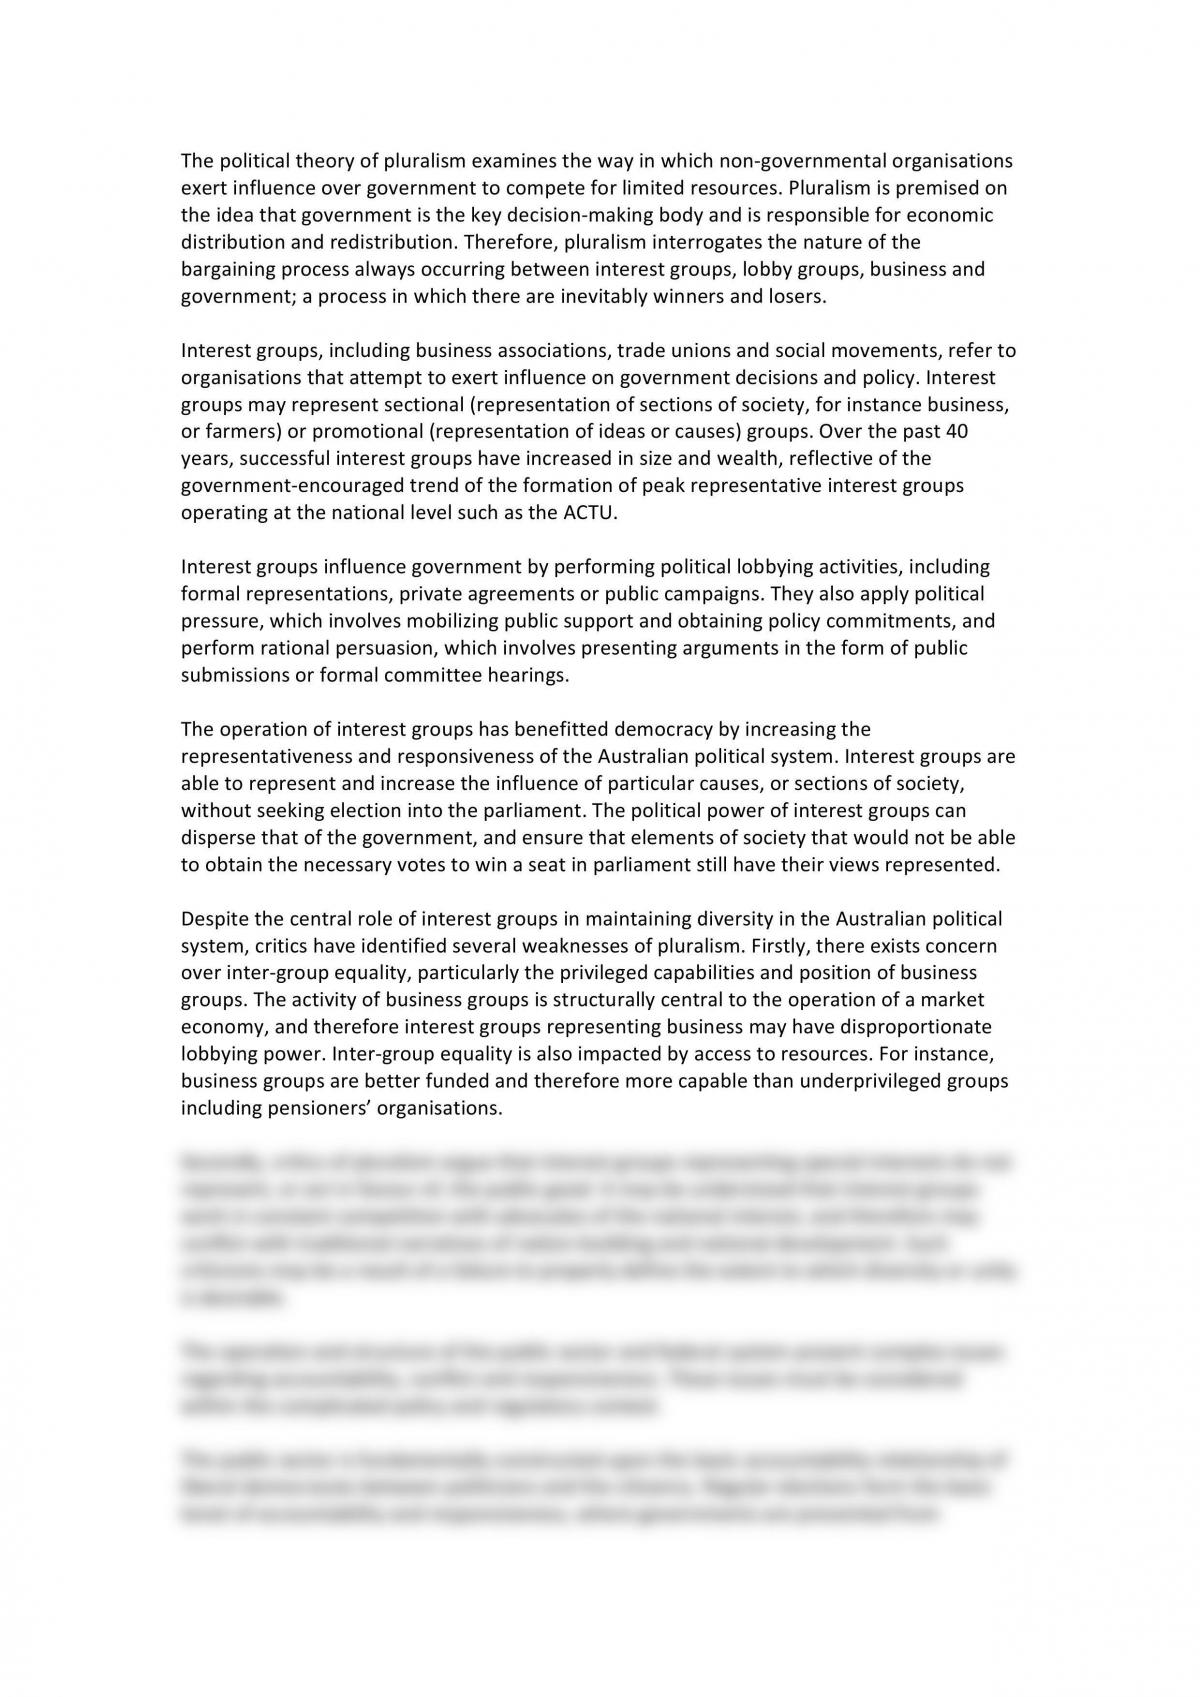 State, representation and pluralism - Page 1